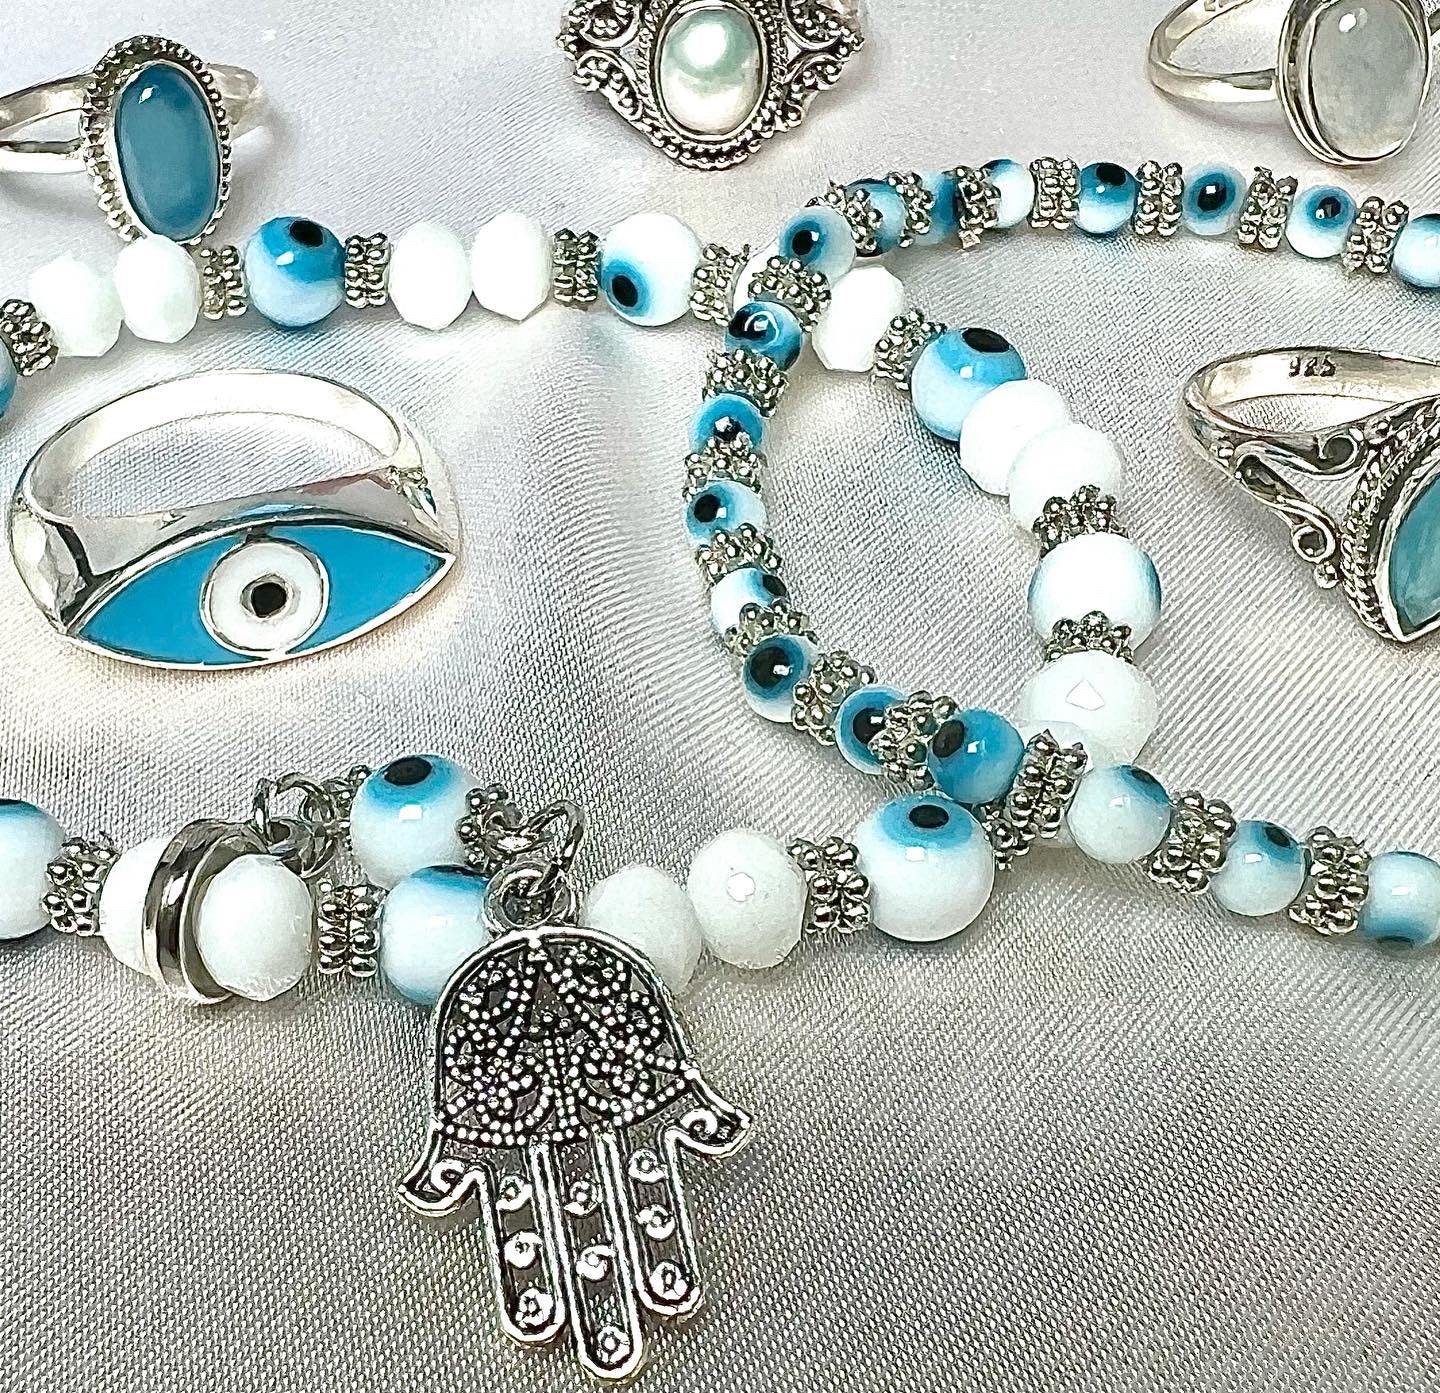 A Super Silver Evil Eye Stretch bracelet with Hamsa Charm adorned with a blue and white evil eye charm and hamsa symbol.